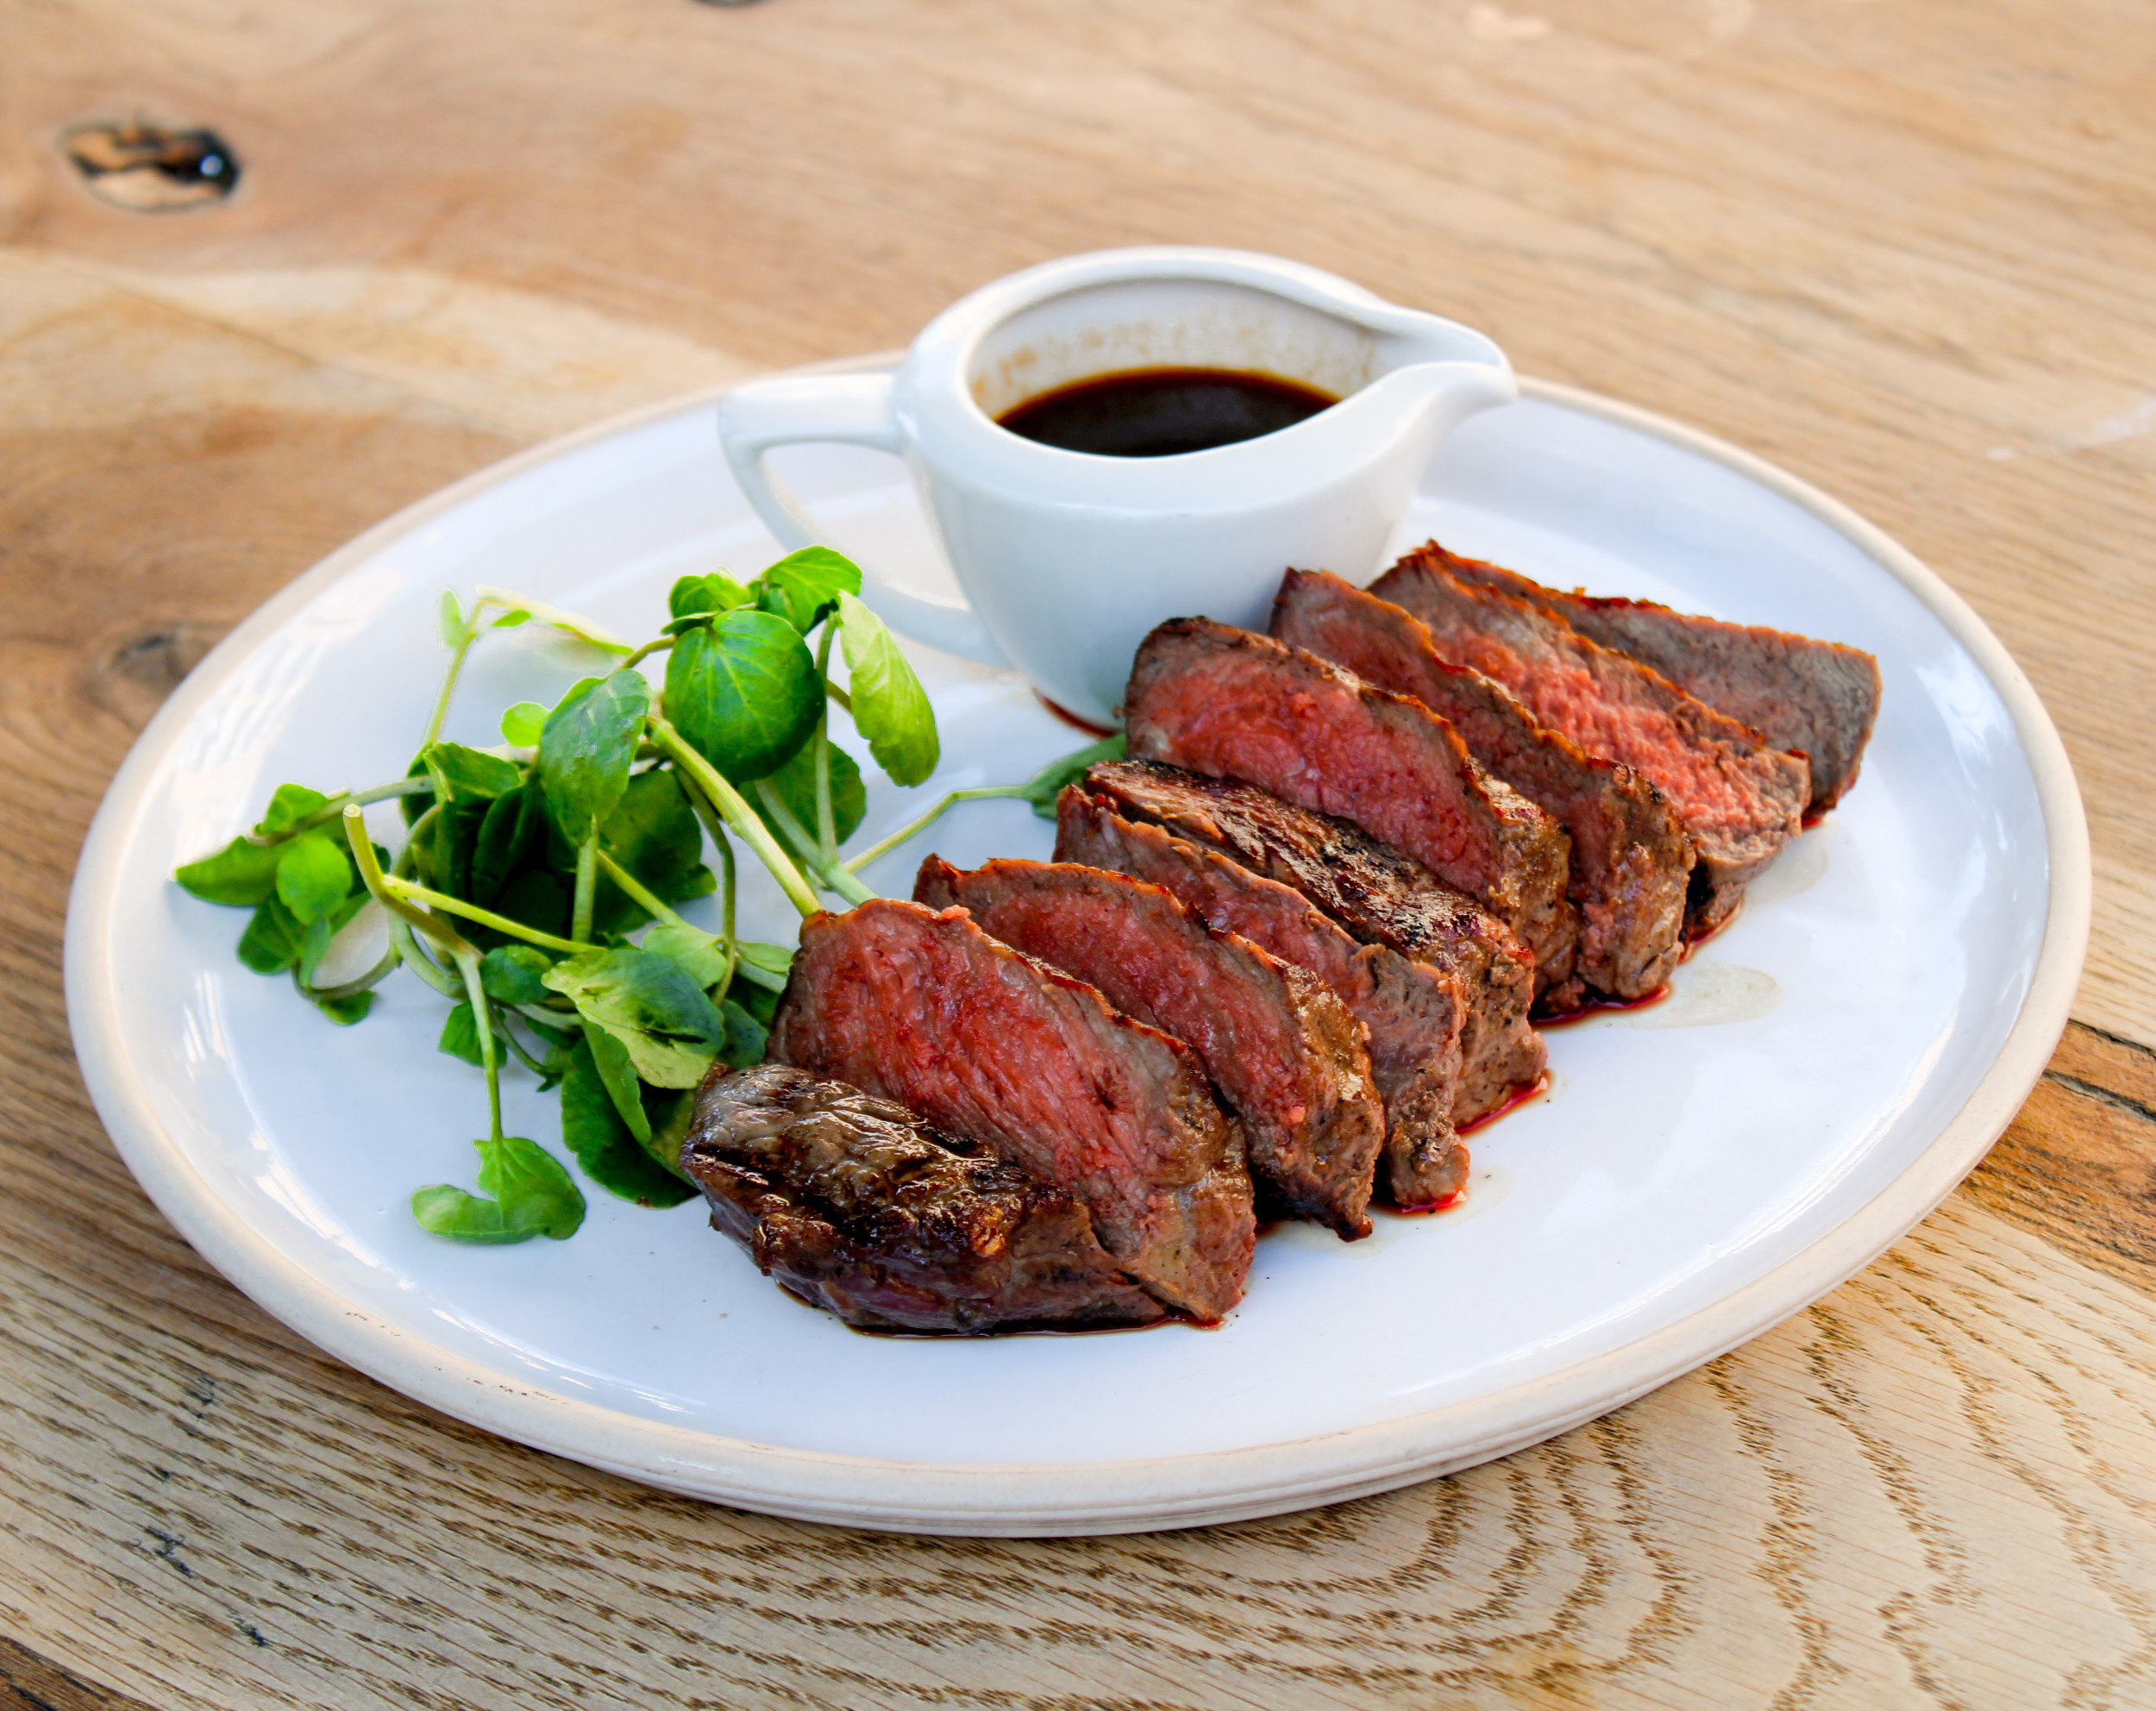 Chop Chop! Tuesday is Steak Night at Nutbourne